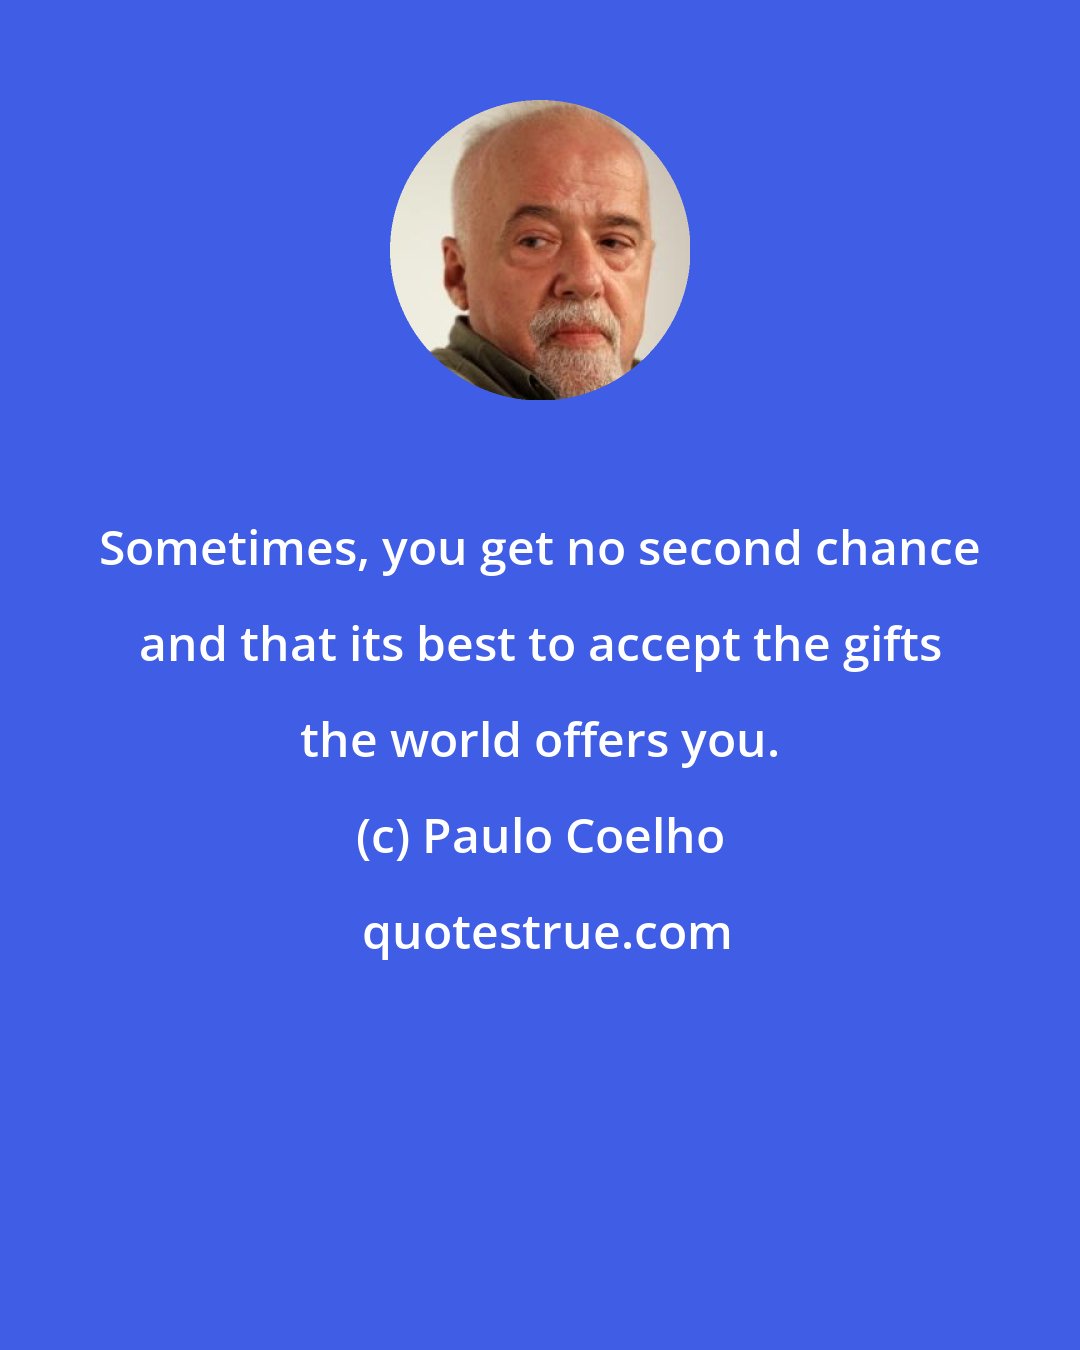 Paulo Coelho: Sometimes, you get no second chance and that its best to accept the gifts the world offers you.